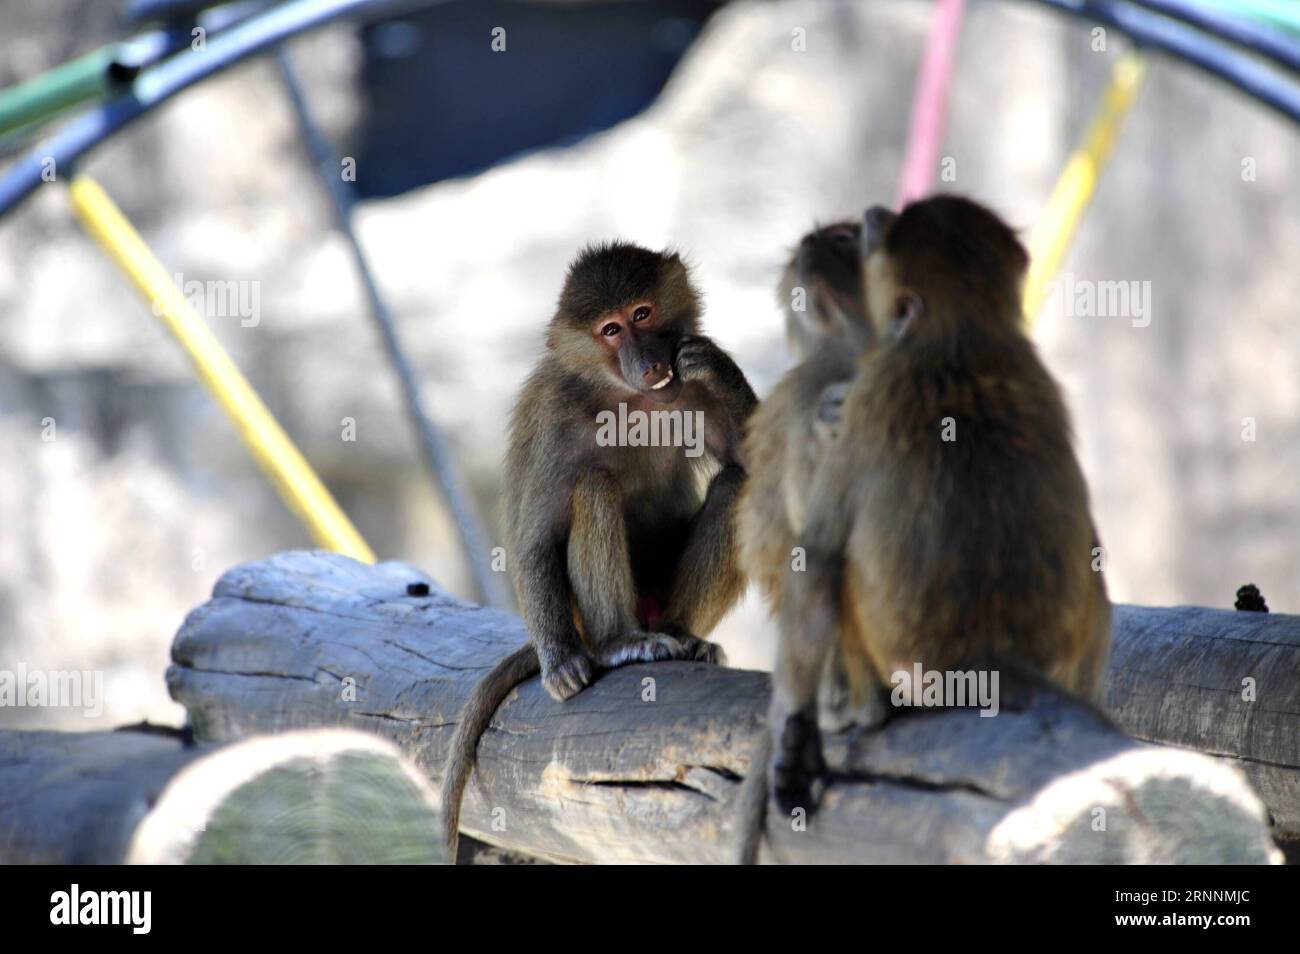 (170721) -- SHANGHAI, July 21, 2017 -- Baboons hide in shades at Shanghai Zoo in east China s Shanghai, July 21, 2017. The meteorological department of east China metropolis Shanghai recorded an air temperature of 40.9 degrees Celsius (105.6 degrees Fahrenheit) at around 2 p.m. Friday, the highest on record in the city in 145 years. The Shanghai Zoo has took many measures to keep the animals cool. ) (lb) CHINA-SHANGHAI-ANIMAL-SUMMER HEAT (CN) ZhangxJiansong PUBLICATIONxNOTxINxCHN   Shanghai July 21 2017 Baboons HIDE in Shades AT Shanghai Zoo in East China S Shanghai July 21 2017 The Meteorolog Stock Photo